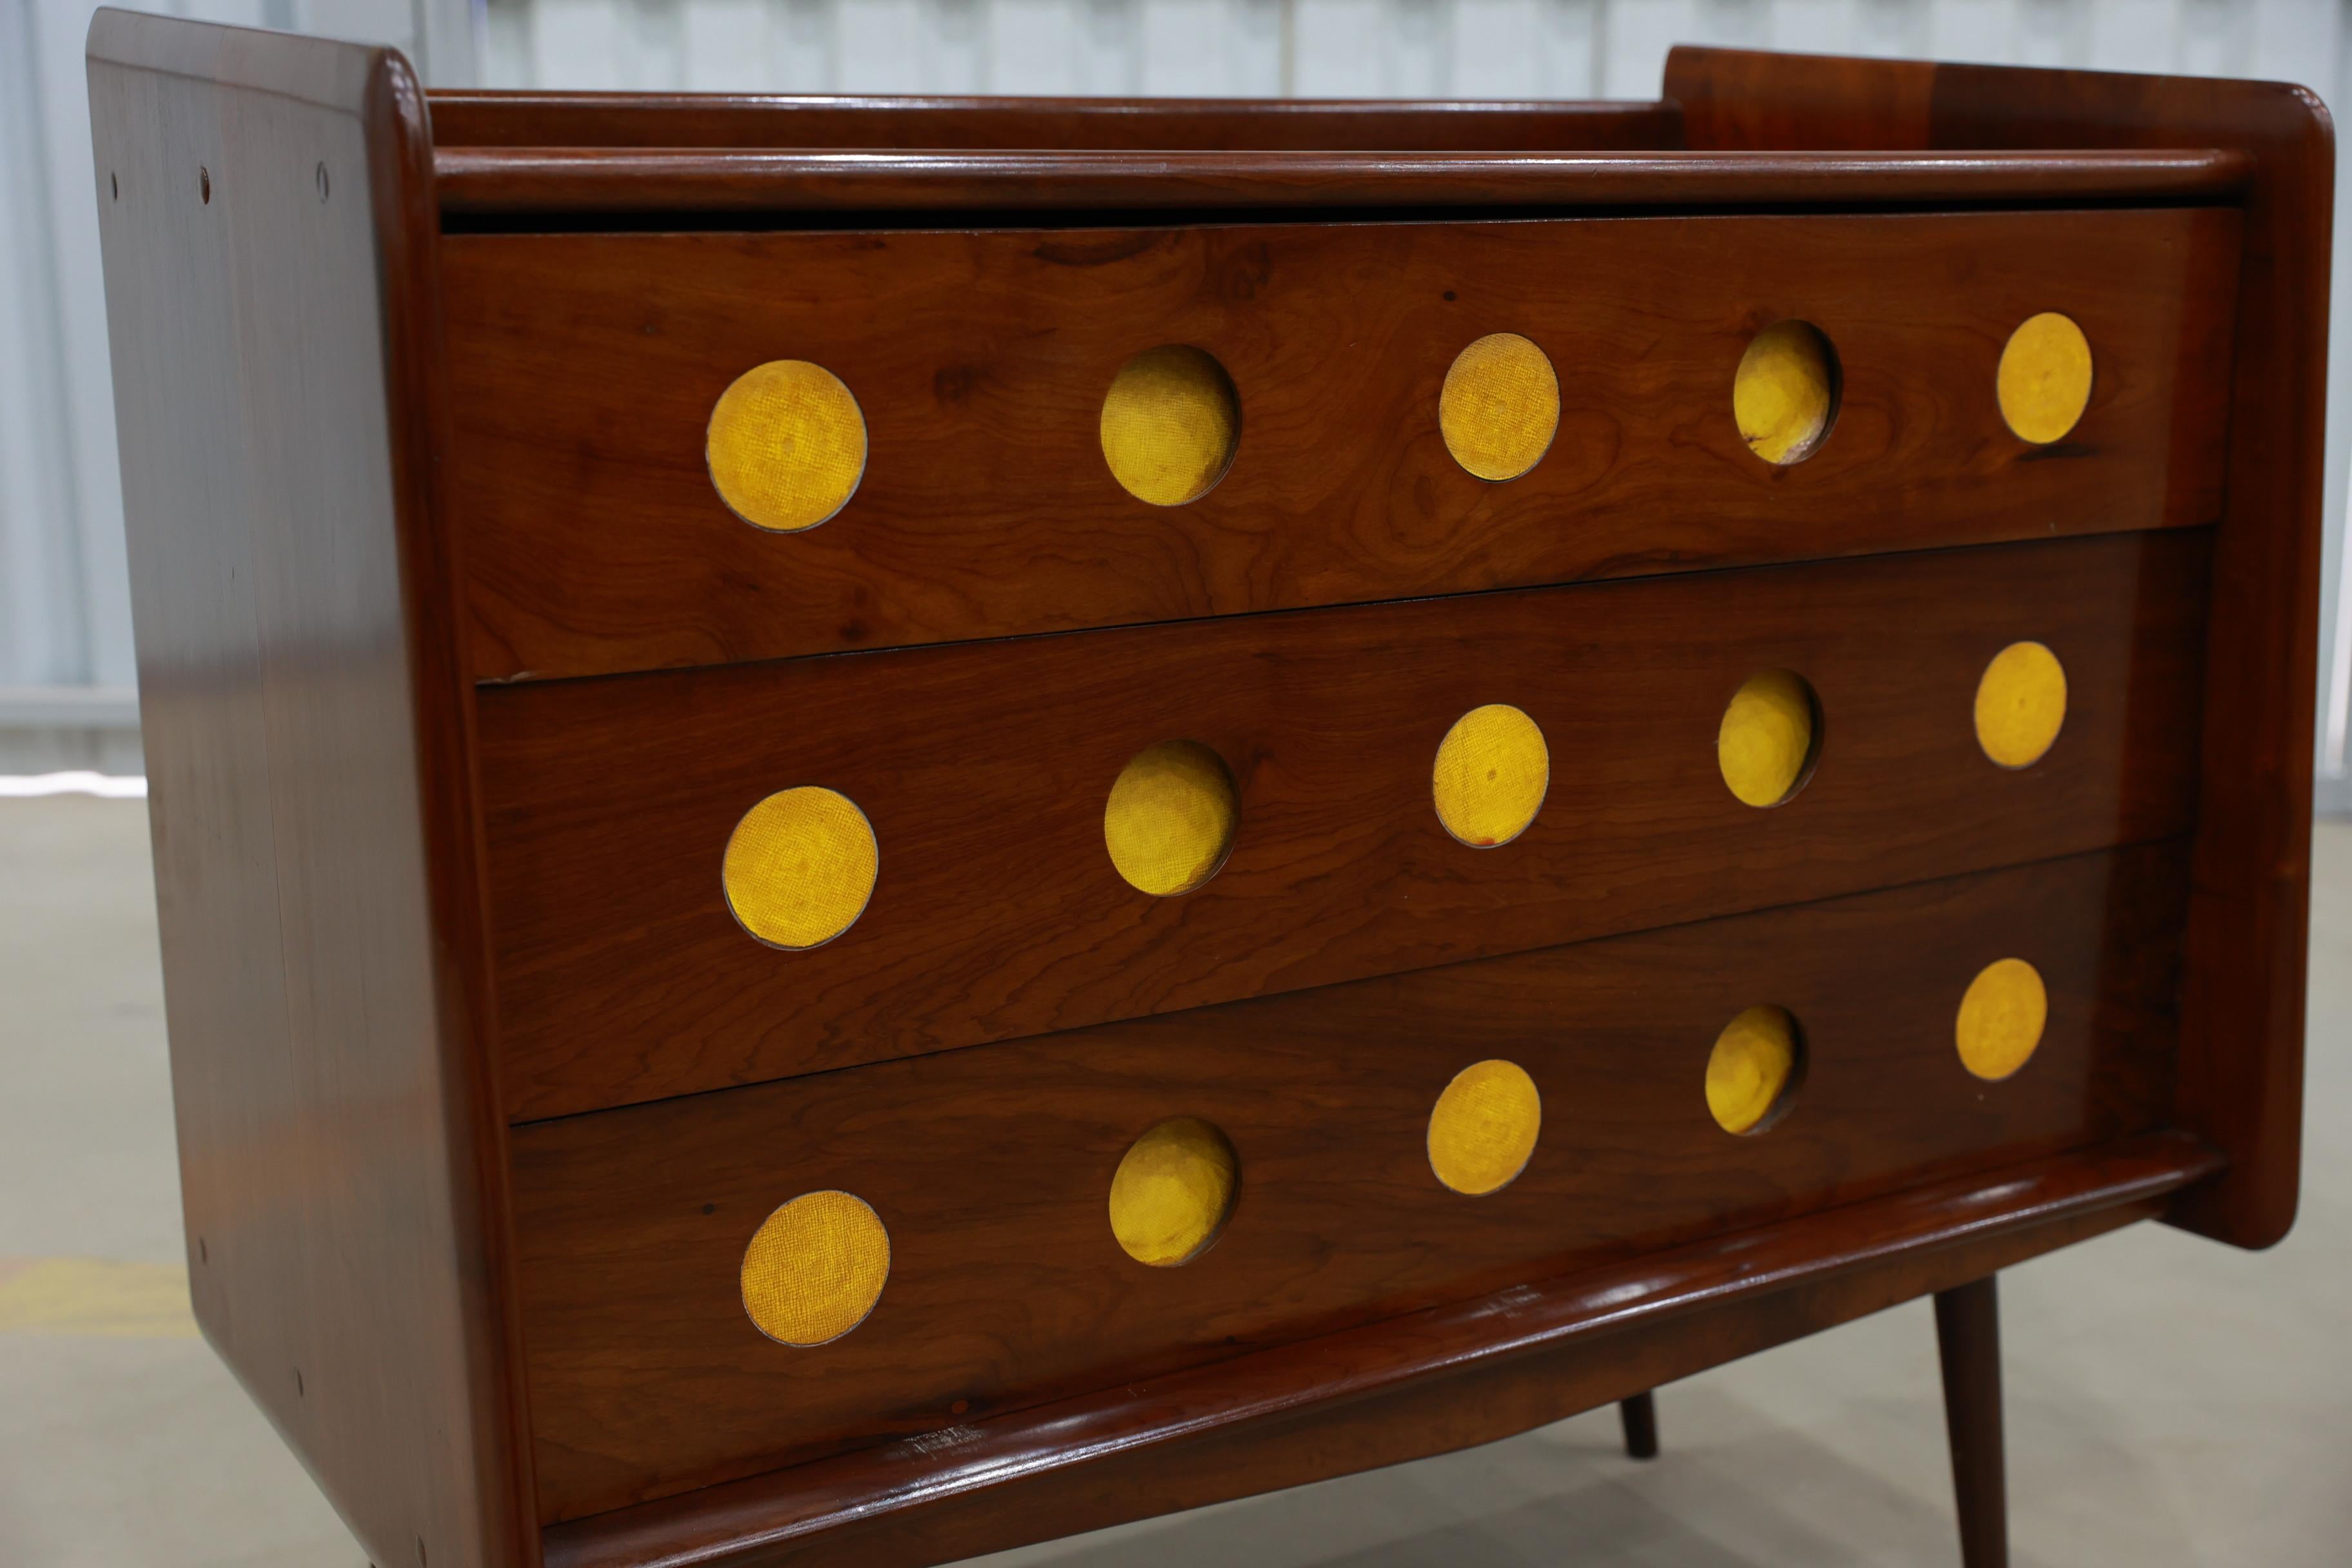 20th Century Brazilian Modern Chest of Drawers in Hardwood by Moveis Cimo, 1950s, Brazil For Sale